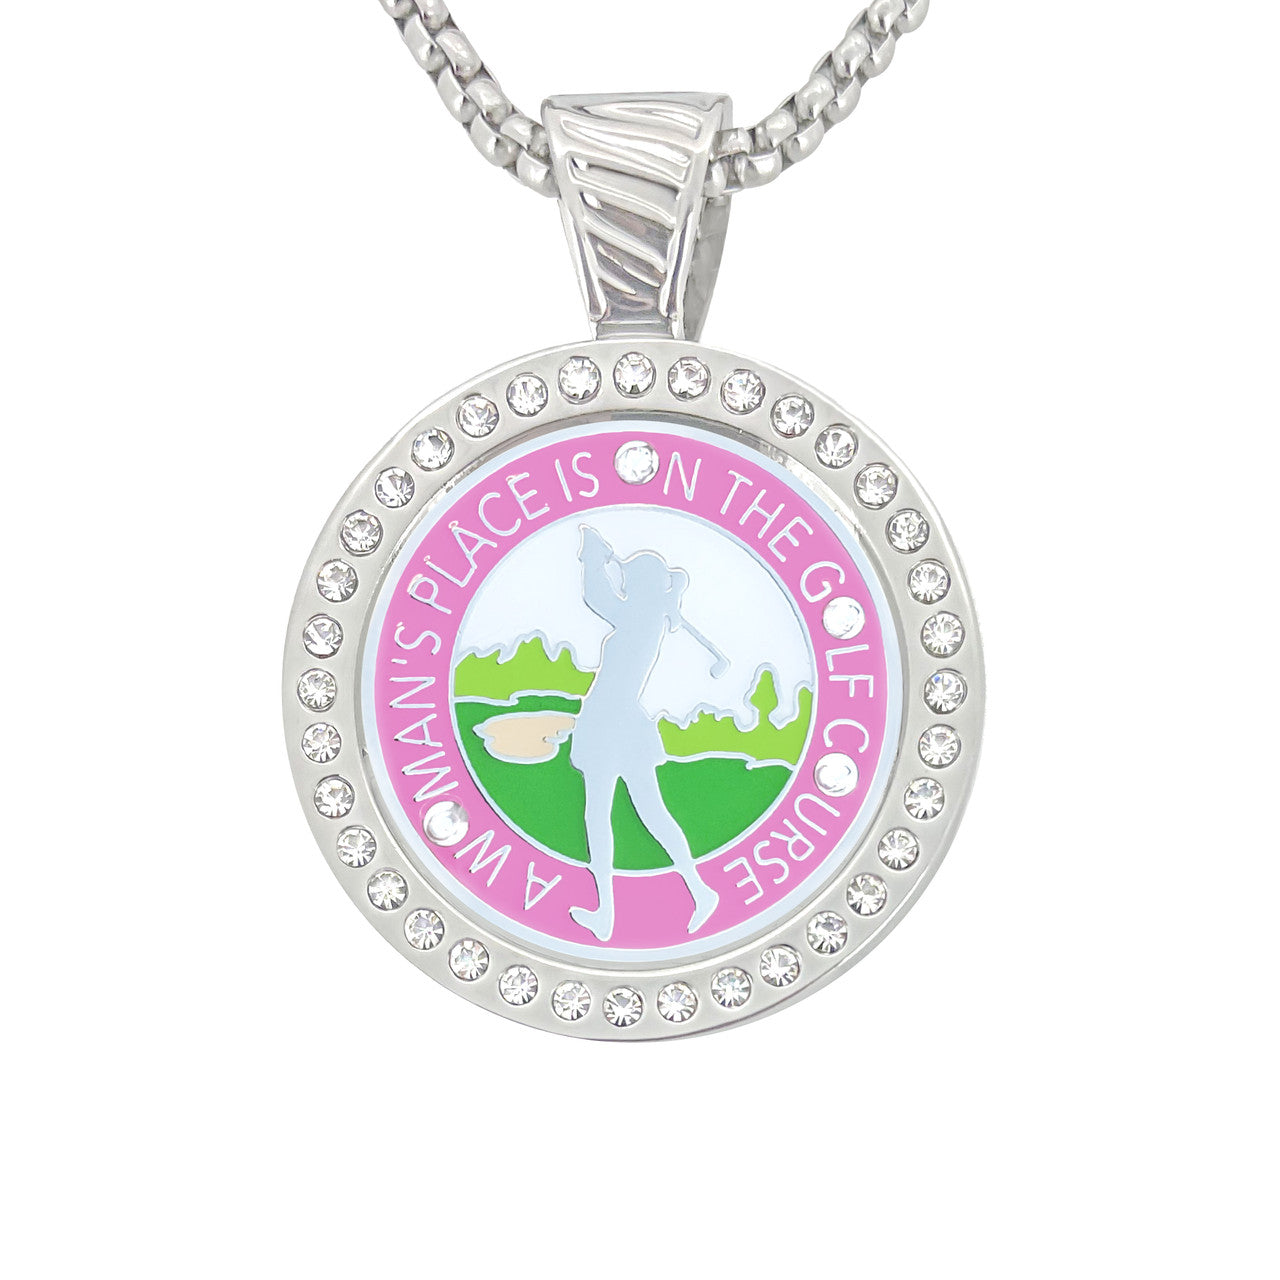 Navika- Chamelion Magnetic Interchangeable "A Woman's Place is On the Course" Ball Marker Necklace